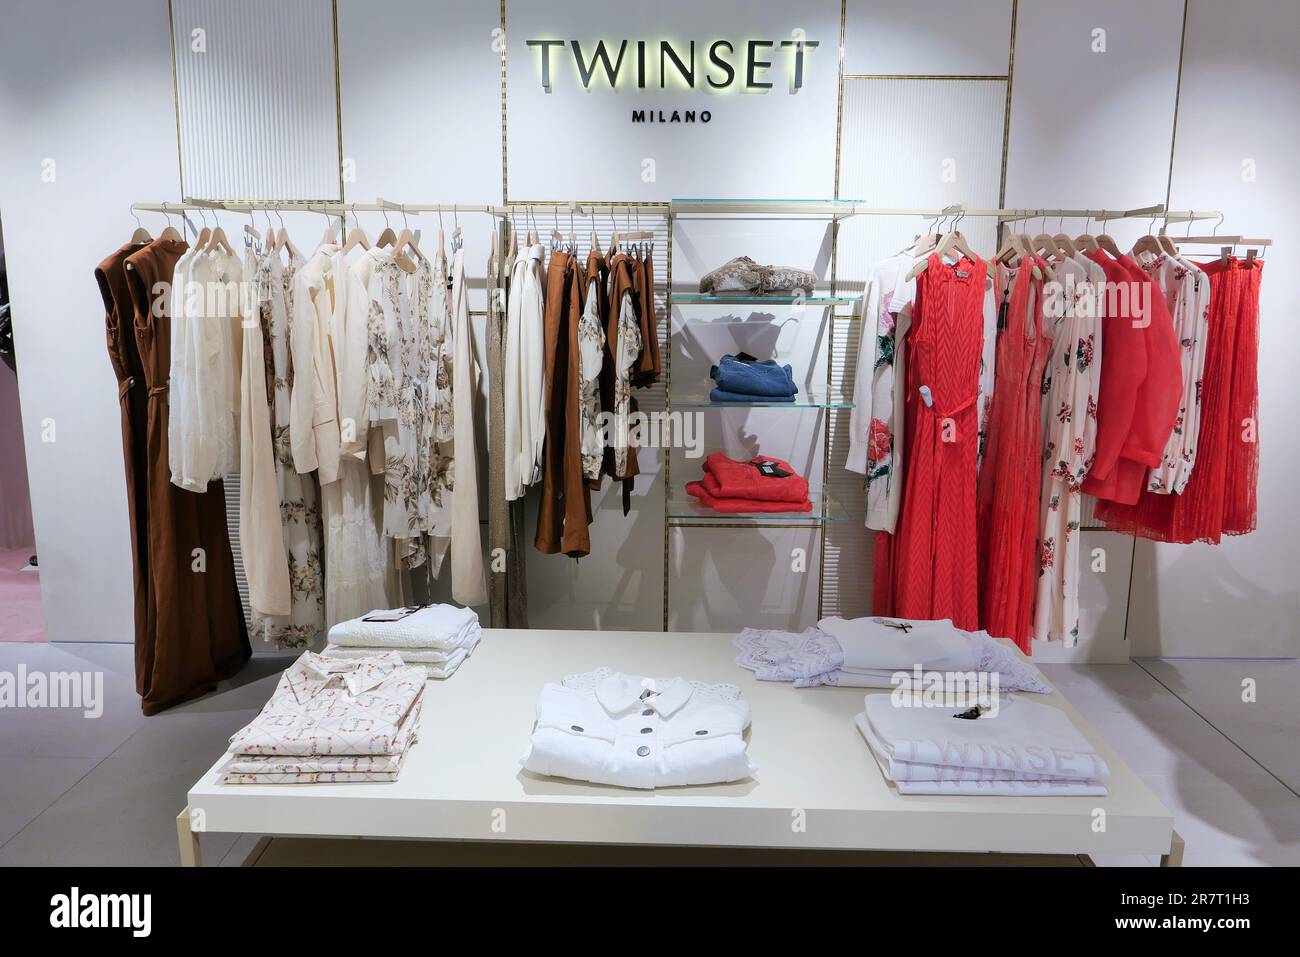 https://c8.alamy.com/comp/2R7T1H3/twinset-clothing-on-display-inside-the-fashion-store-2R7T1H3.jpg